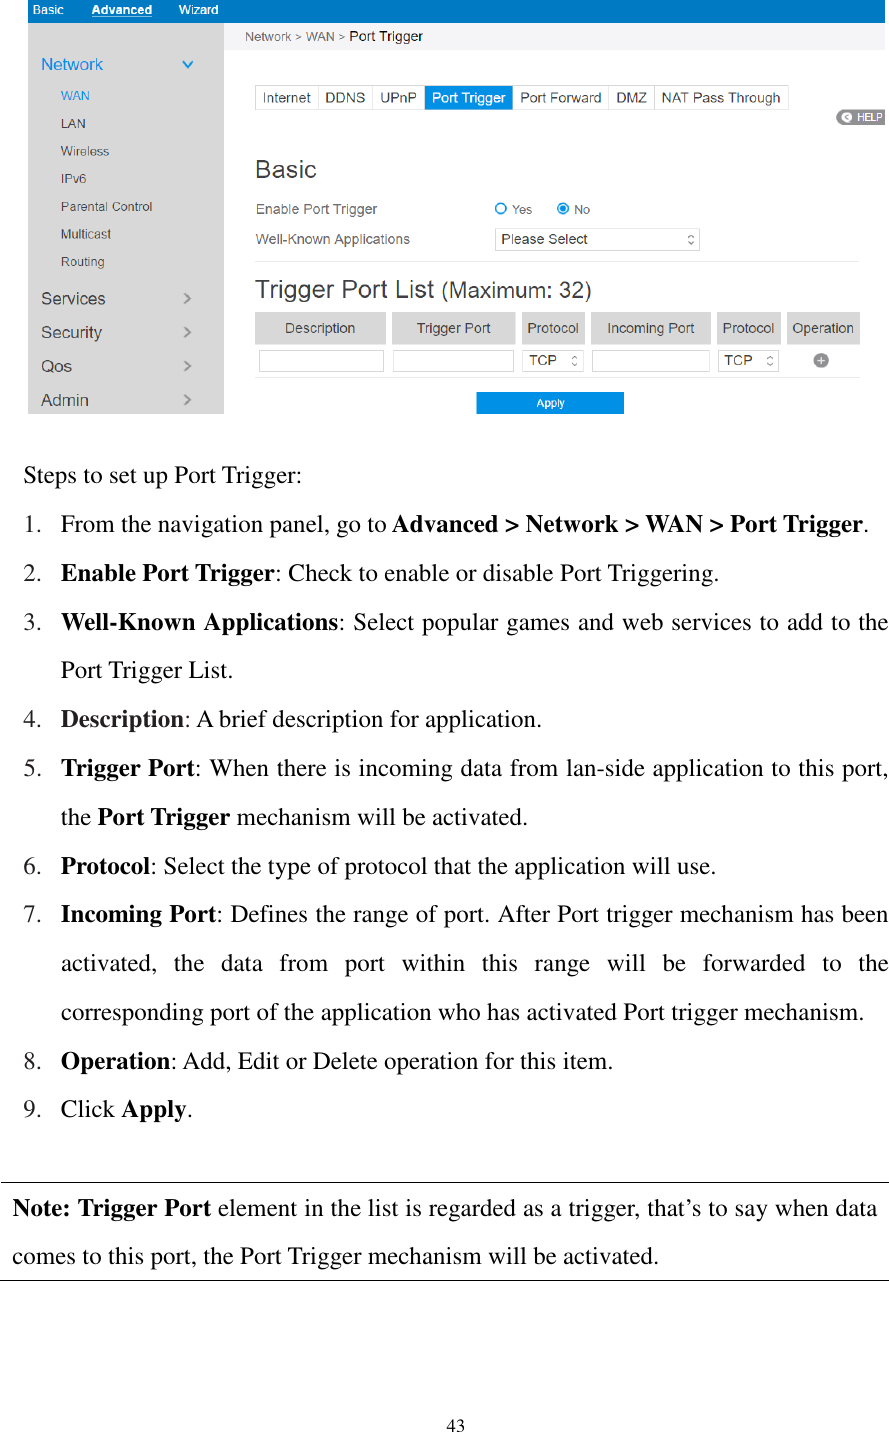  43    Steps to set up Port Trigger:   1. From the navigation panel, go to Advanced &gt; Network &gt; WAN &gt; Port Trigger. 2. Enable Port Trigger: Check to enable or disable Port Triggering. 3. Well-Known Applications: Select popular games and web services to add to the Port Trigger List. 4. Description: A brief description for application. 5. Trigger Port: When there is incoming data from lan-side application to this port, the Port Trigger mechanism will be activated. 6. Protocol: Select the type of protocol that the application will use.   7. Incoming Port: Defines the range of port. After Port trigger mechanism has been activated,  the  data  from  port  within  this  range  will  be  forwarded  to  the corresponding port of the application who has activated Port trigger mechanism. 8. Operation: Add, Edit or Delete operation for this item. 9. Click Apply.    Note: Trigger Port element in the list is regarded as a trigger, that’s to say when data comes to this port, the Port Trigger mechanism will be activated.   